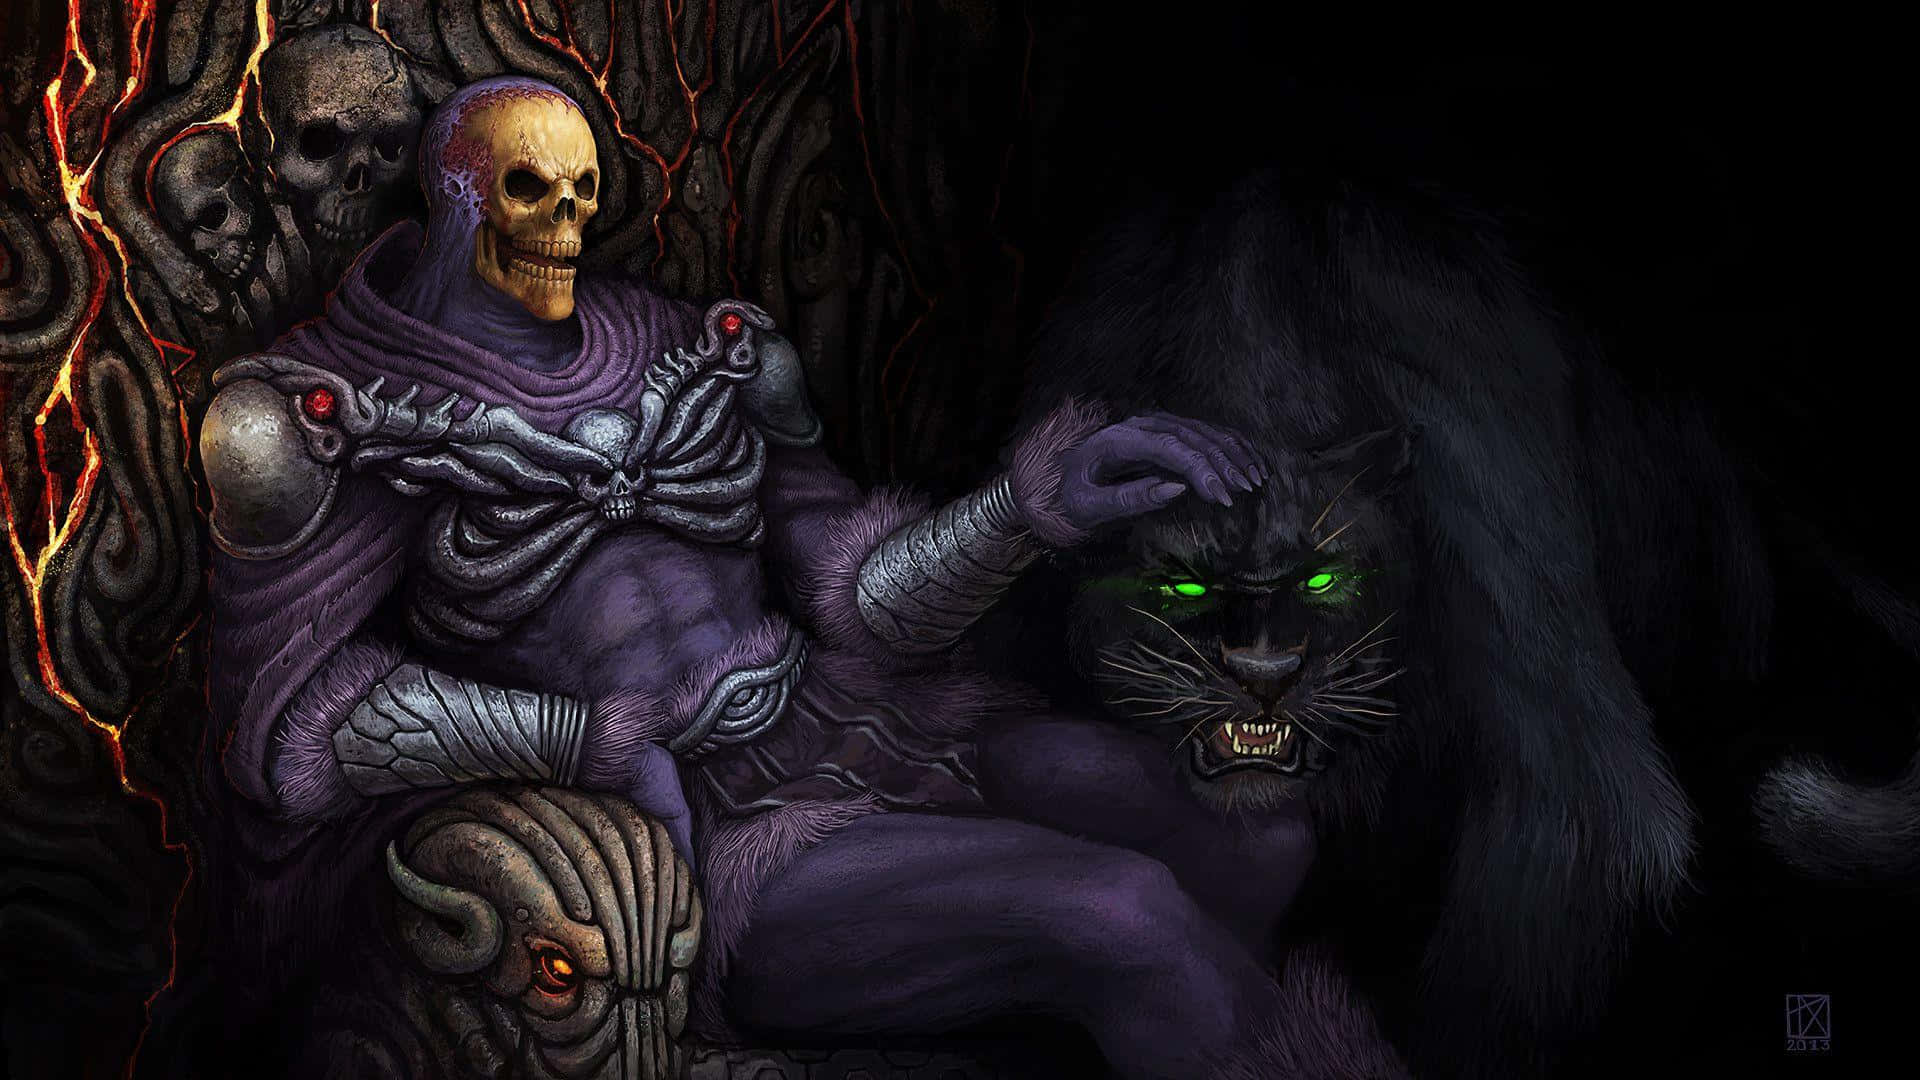 A Skeleton Sitting On A Purple Chair With A Black Cat Background